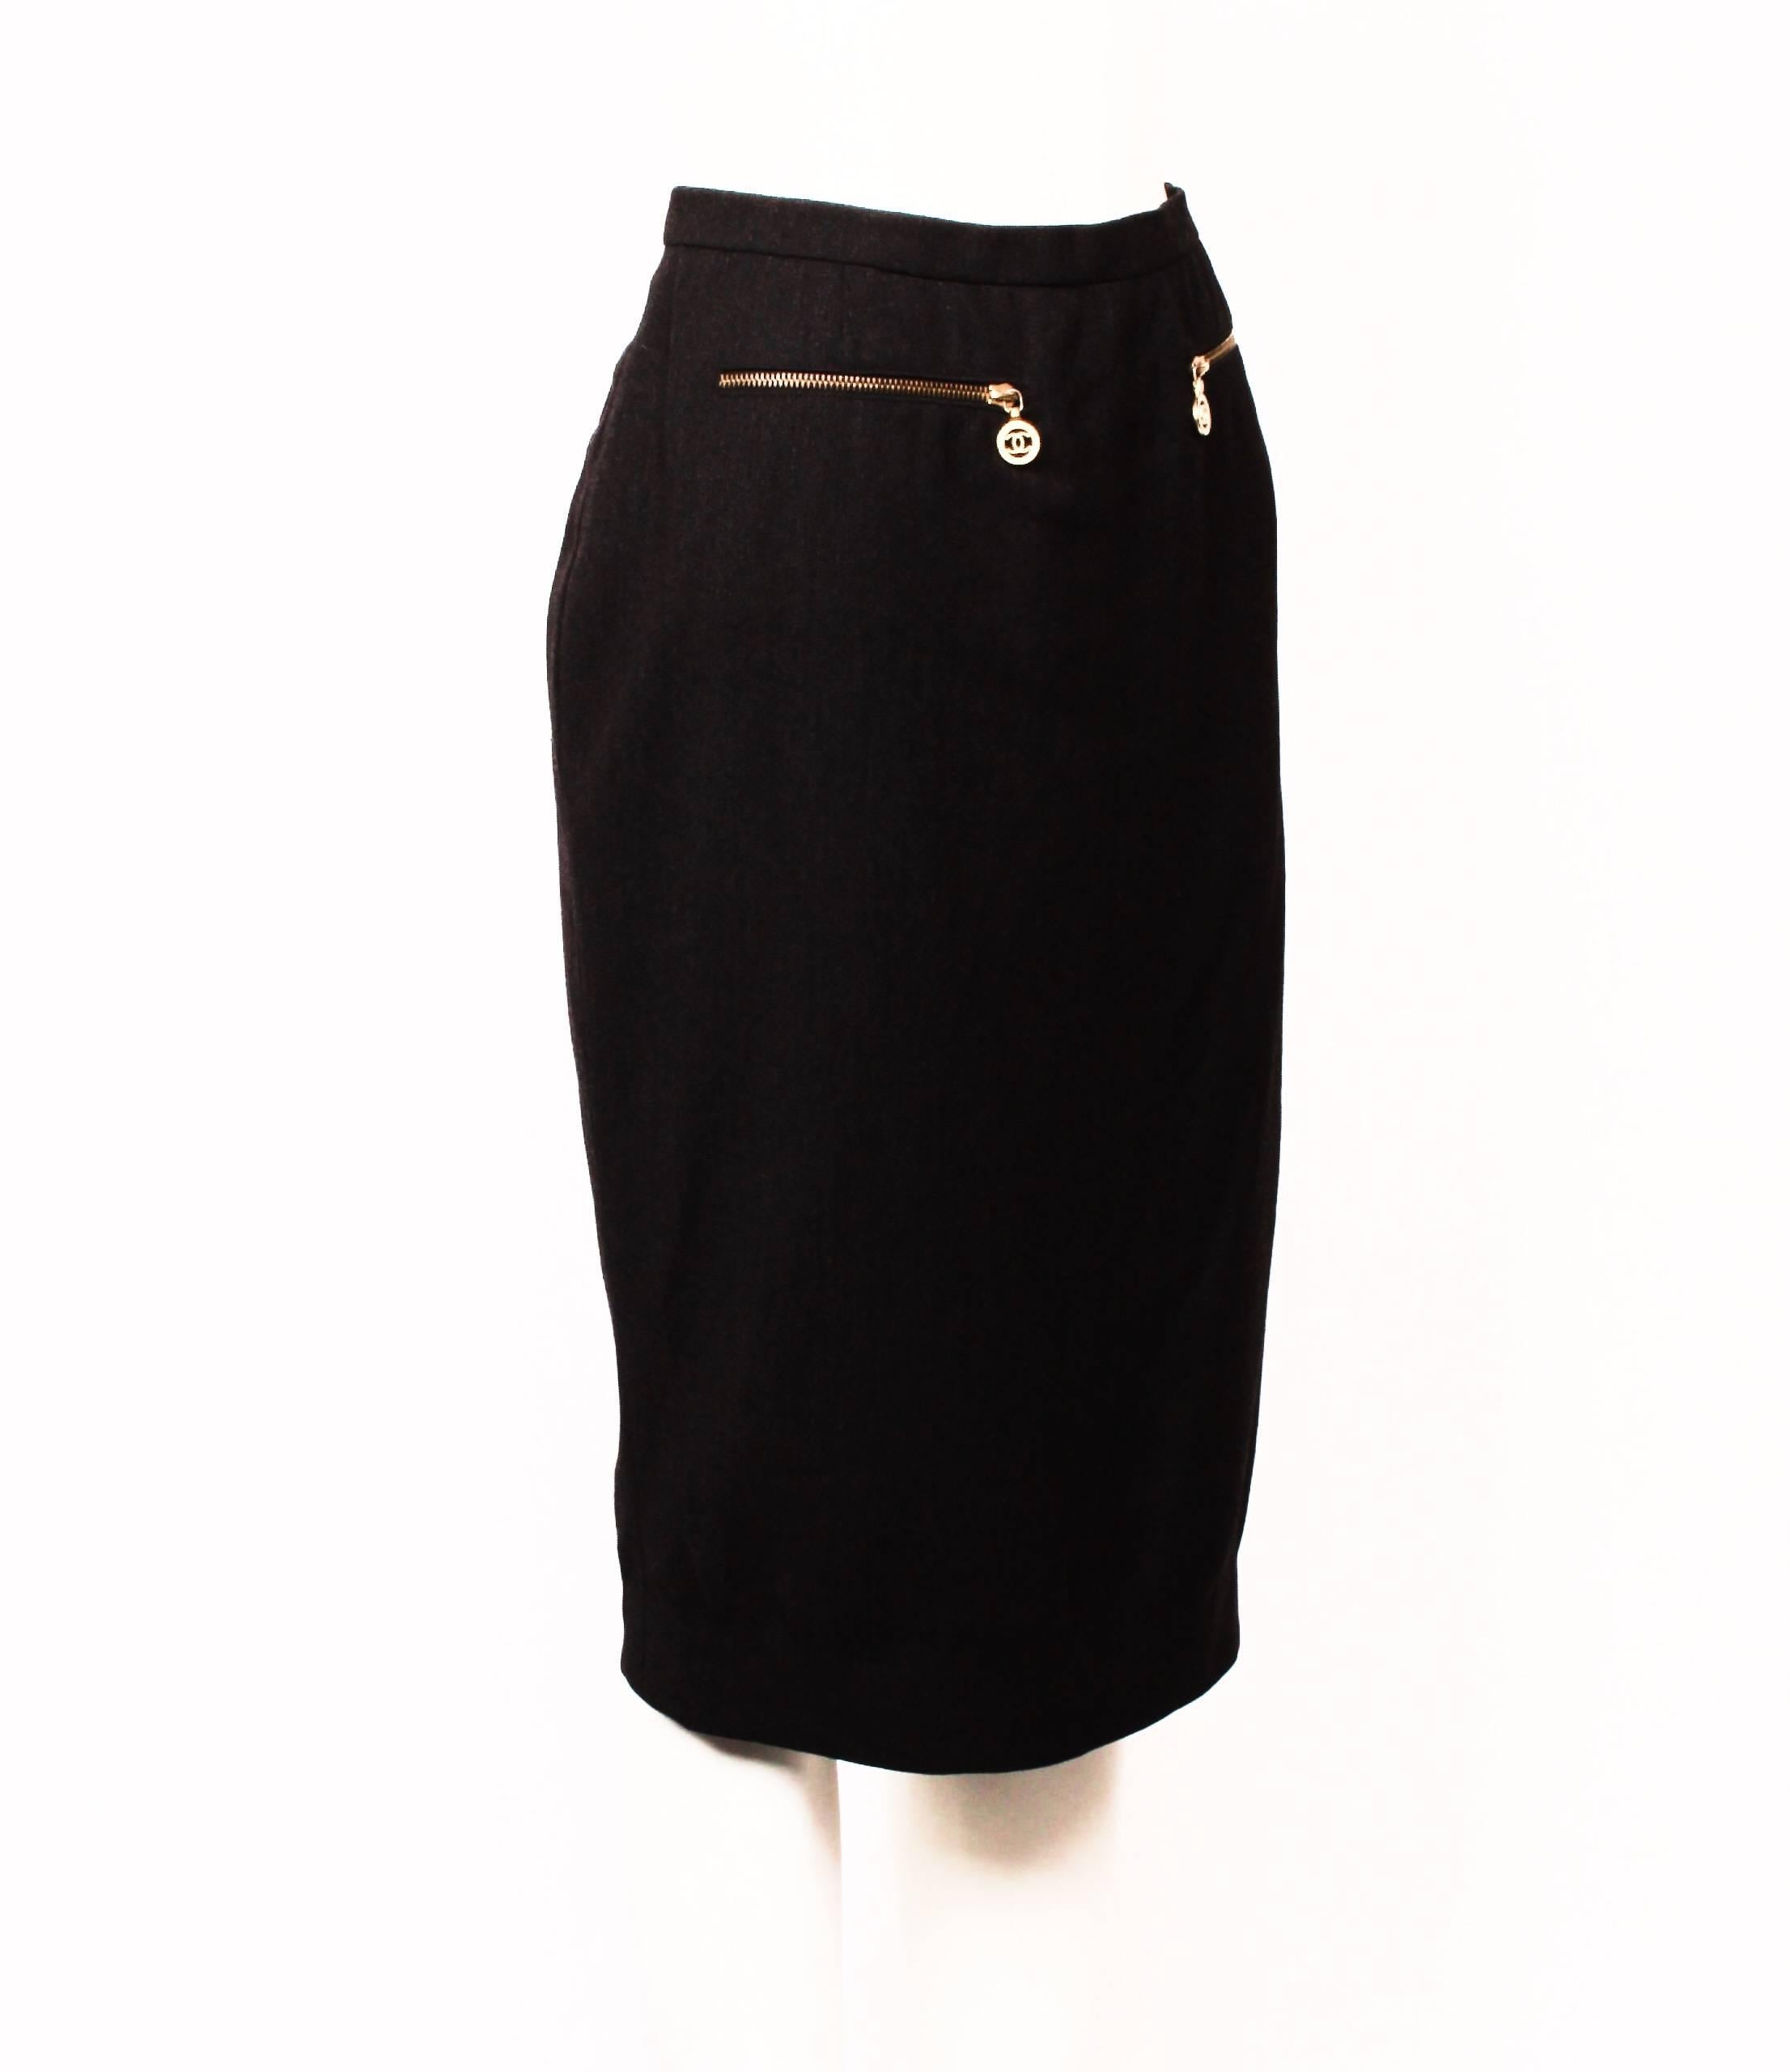 Gorgeous Chanel Boutique fitted pencil skirt in dark charcoal grey.
Features decorative gold zipper pockets with iconic Chanel CC logo pulls.  The skirt is just below knee length and is fully lined. Back invisible zipper and hook and eye